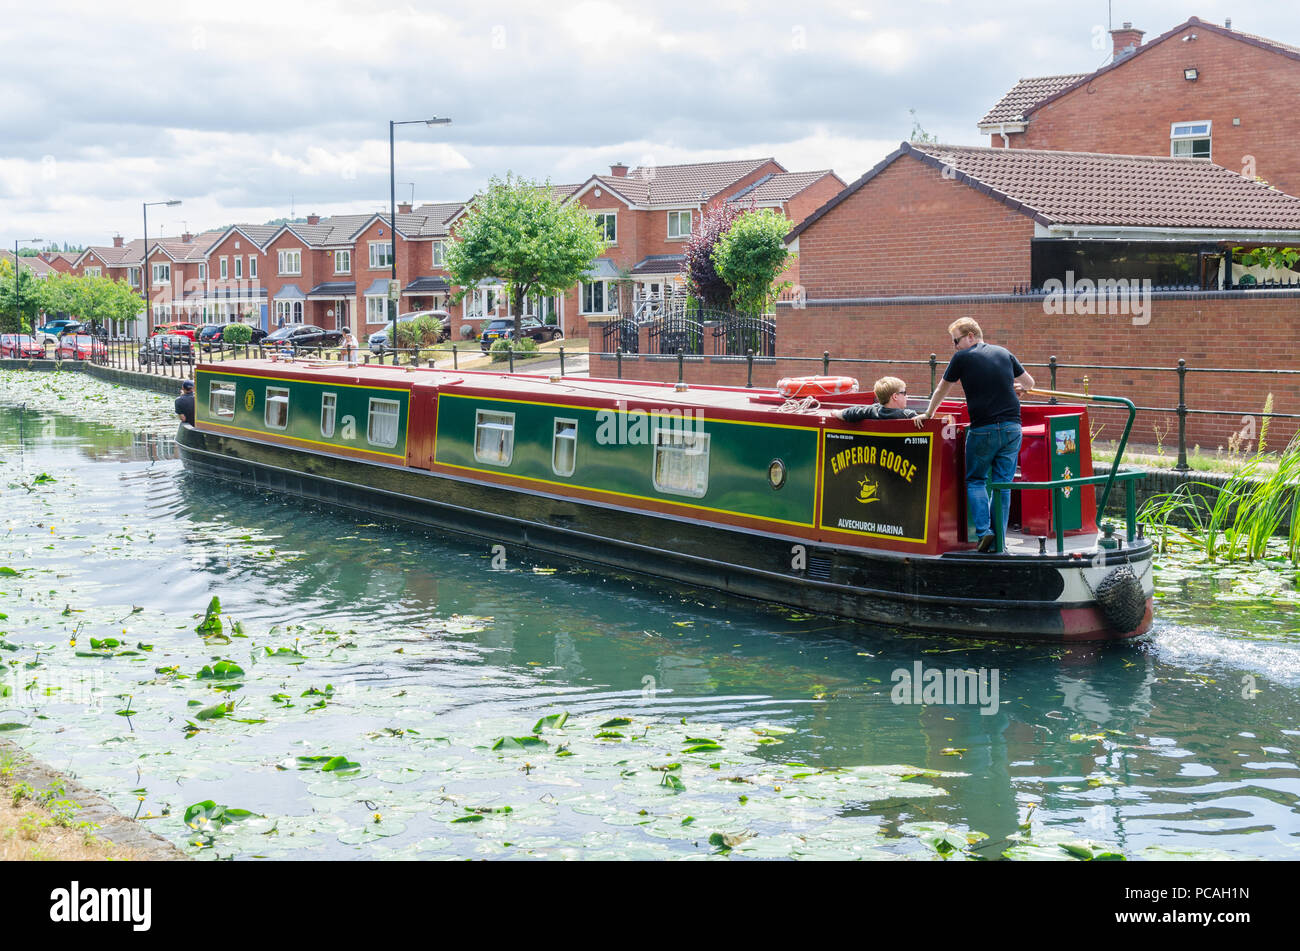 The Birmingham Canal in Tipton, Dudley which runs between Birmingham and Wolverhampton with water lilies growing in the unpolluted water Stock Photo